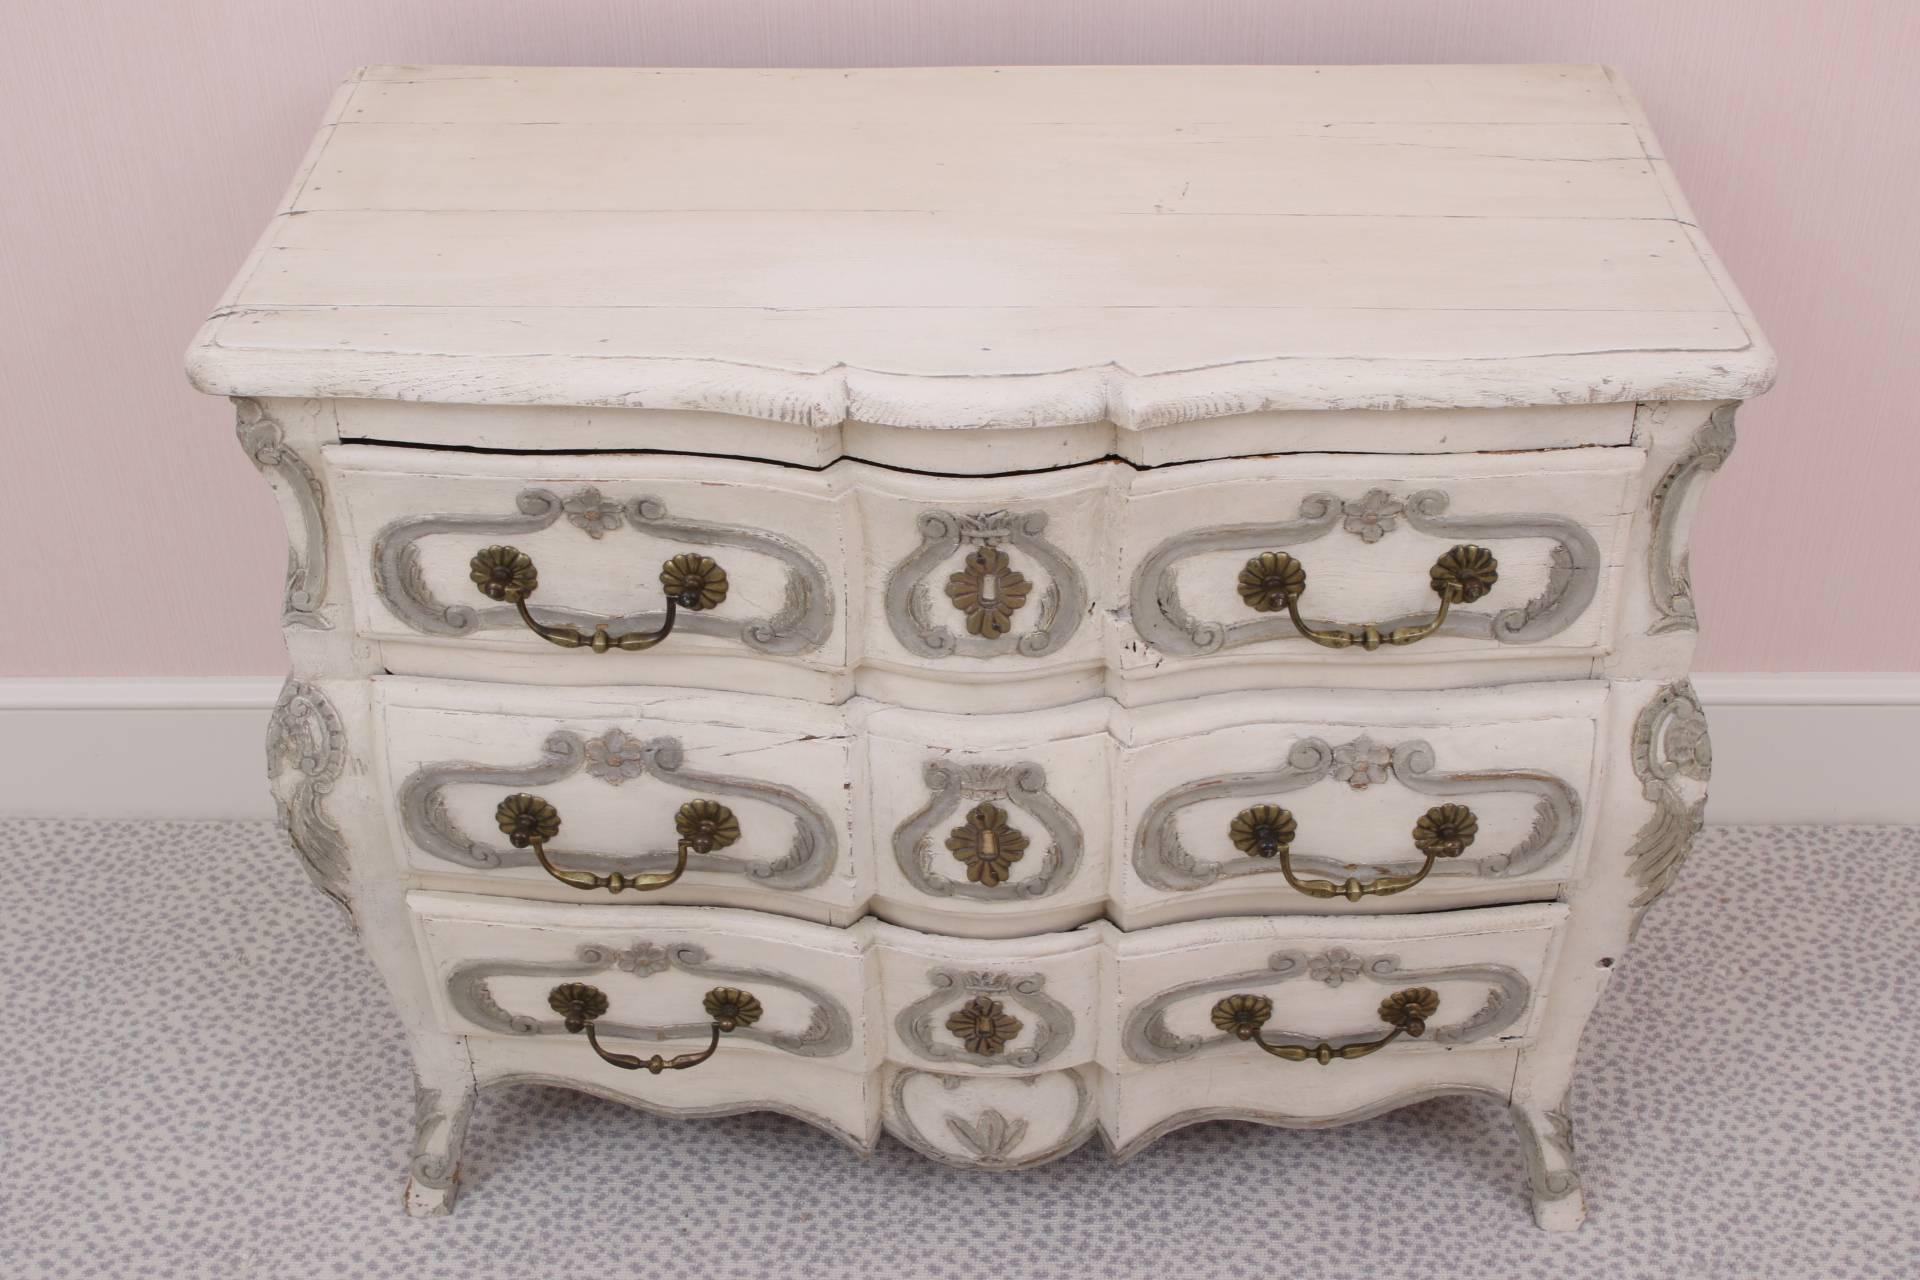 In cream paint with carved decoration in pale grey. A plank top and recessed shaped sides, three drawers with grey scrolled motifs, the centre ones with faux escutcheons, and fine bronze handle pulls. The side frames with grey cartouches and leaf